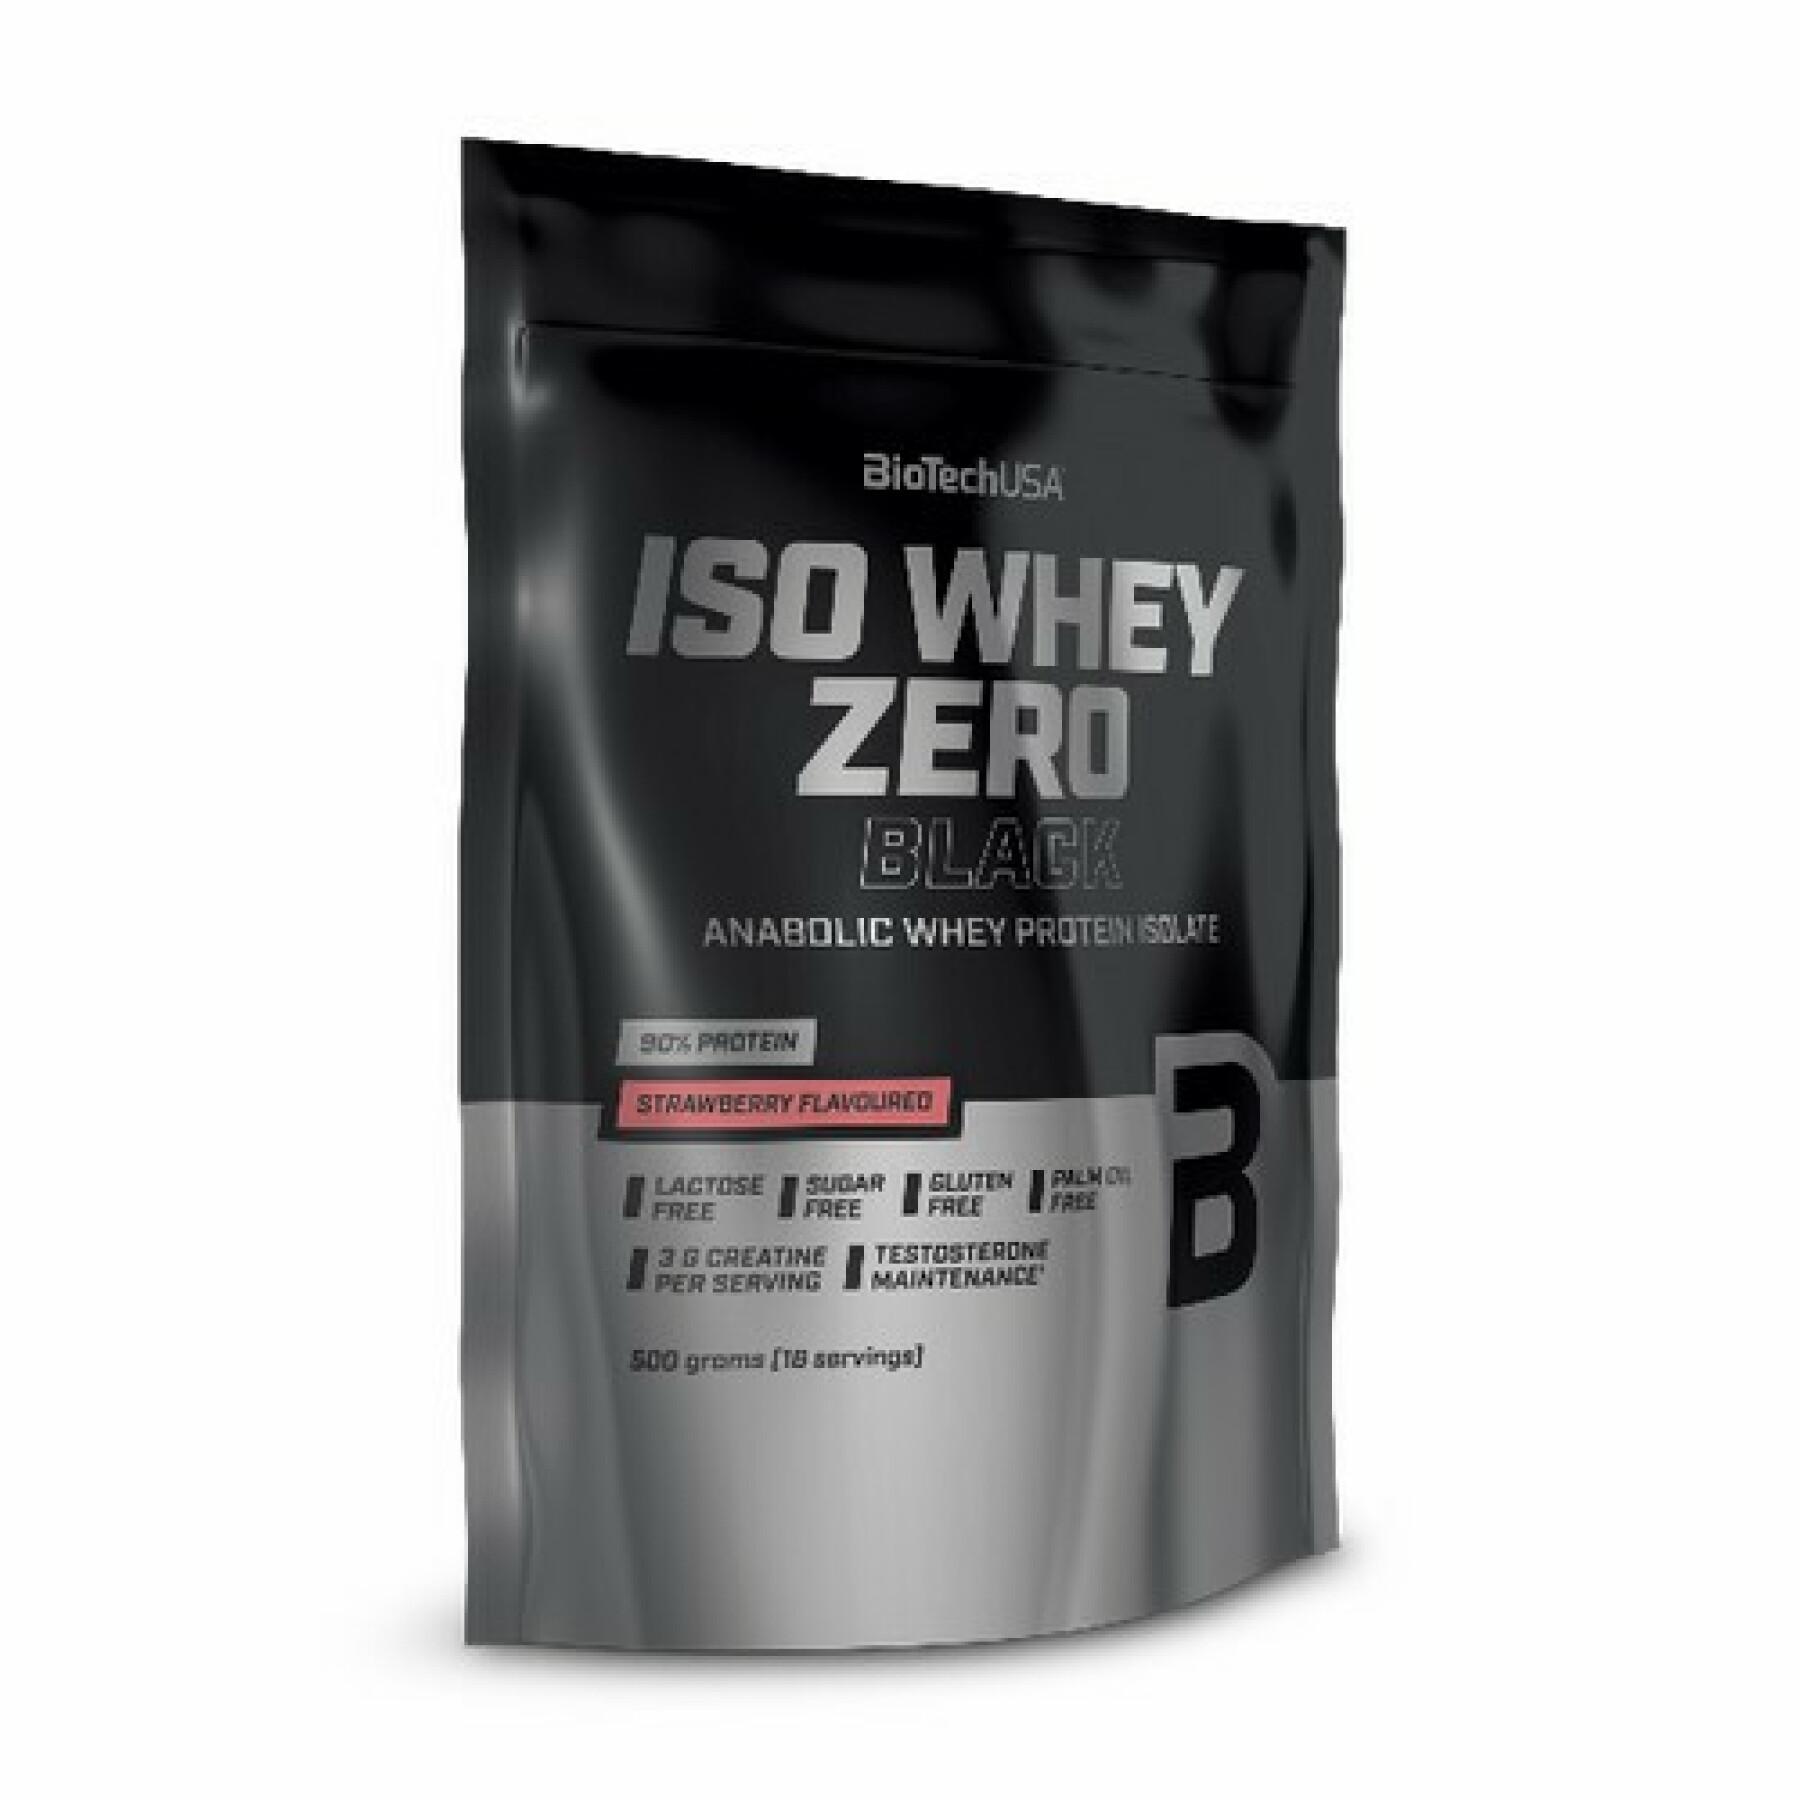 Pack of 10 bags of protein Biotech USA iso whey zero - Fraise - 500g